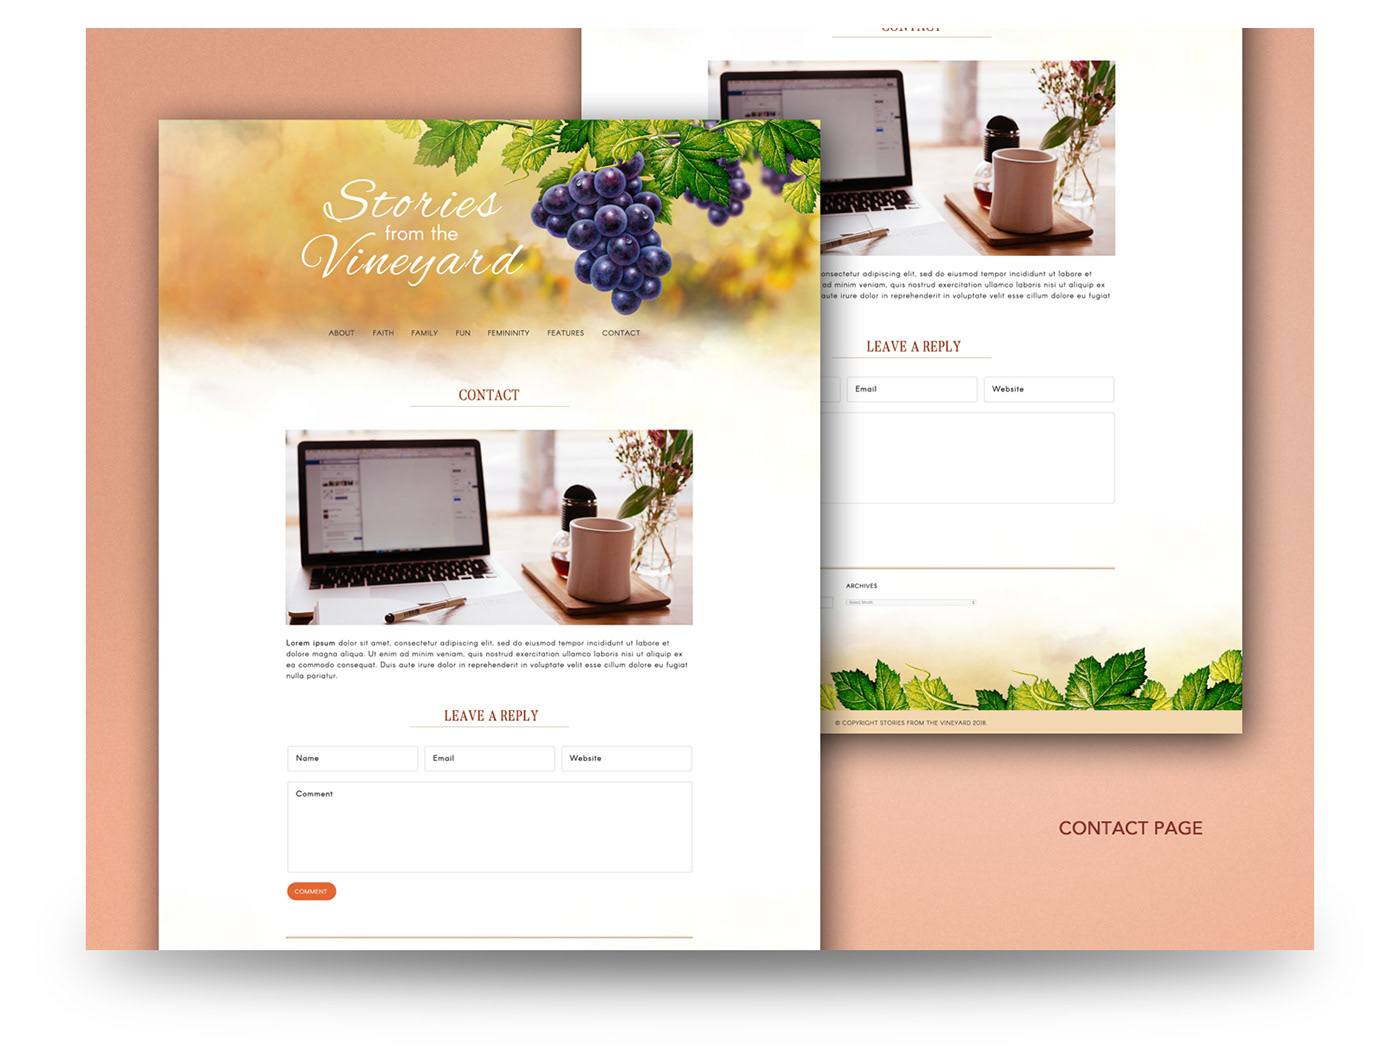 blogger Website warm colors homey vineyard grapes Tuscany leaves